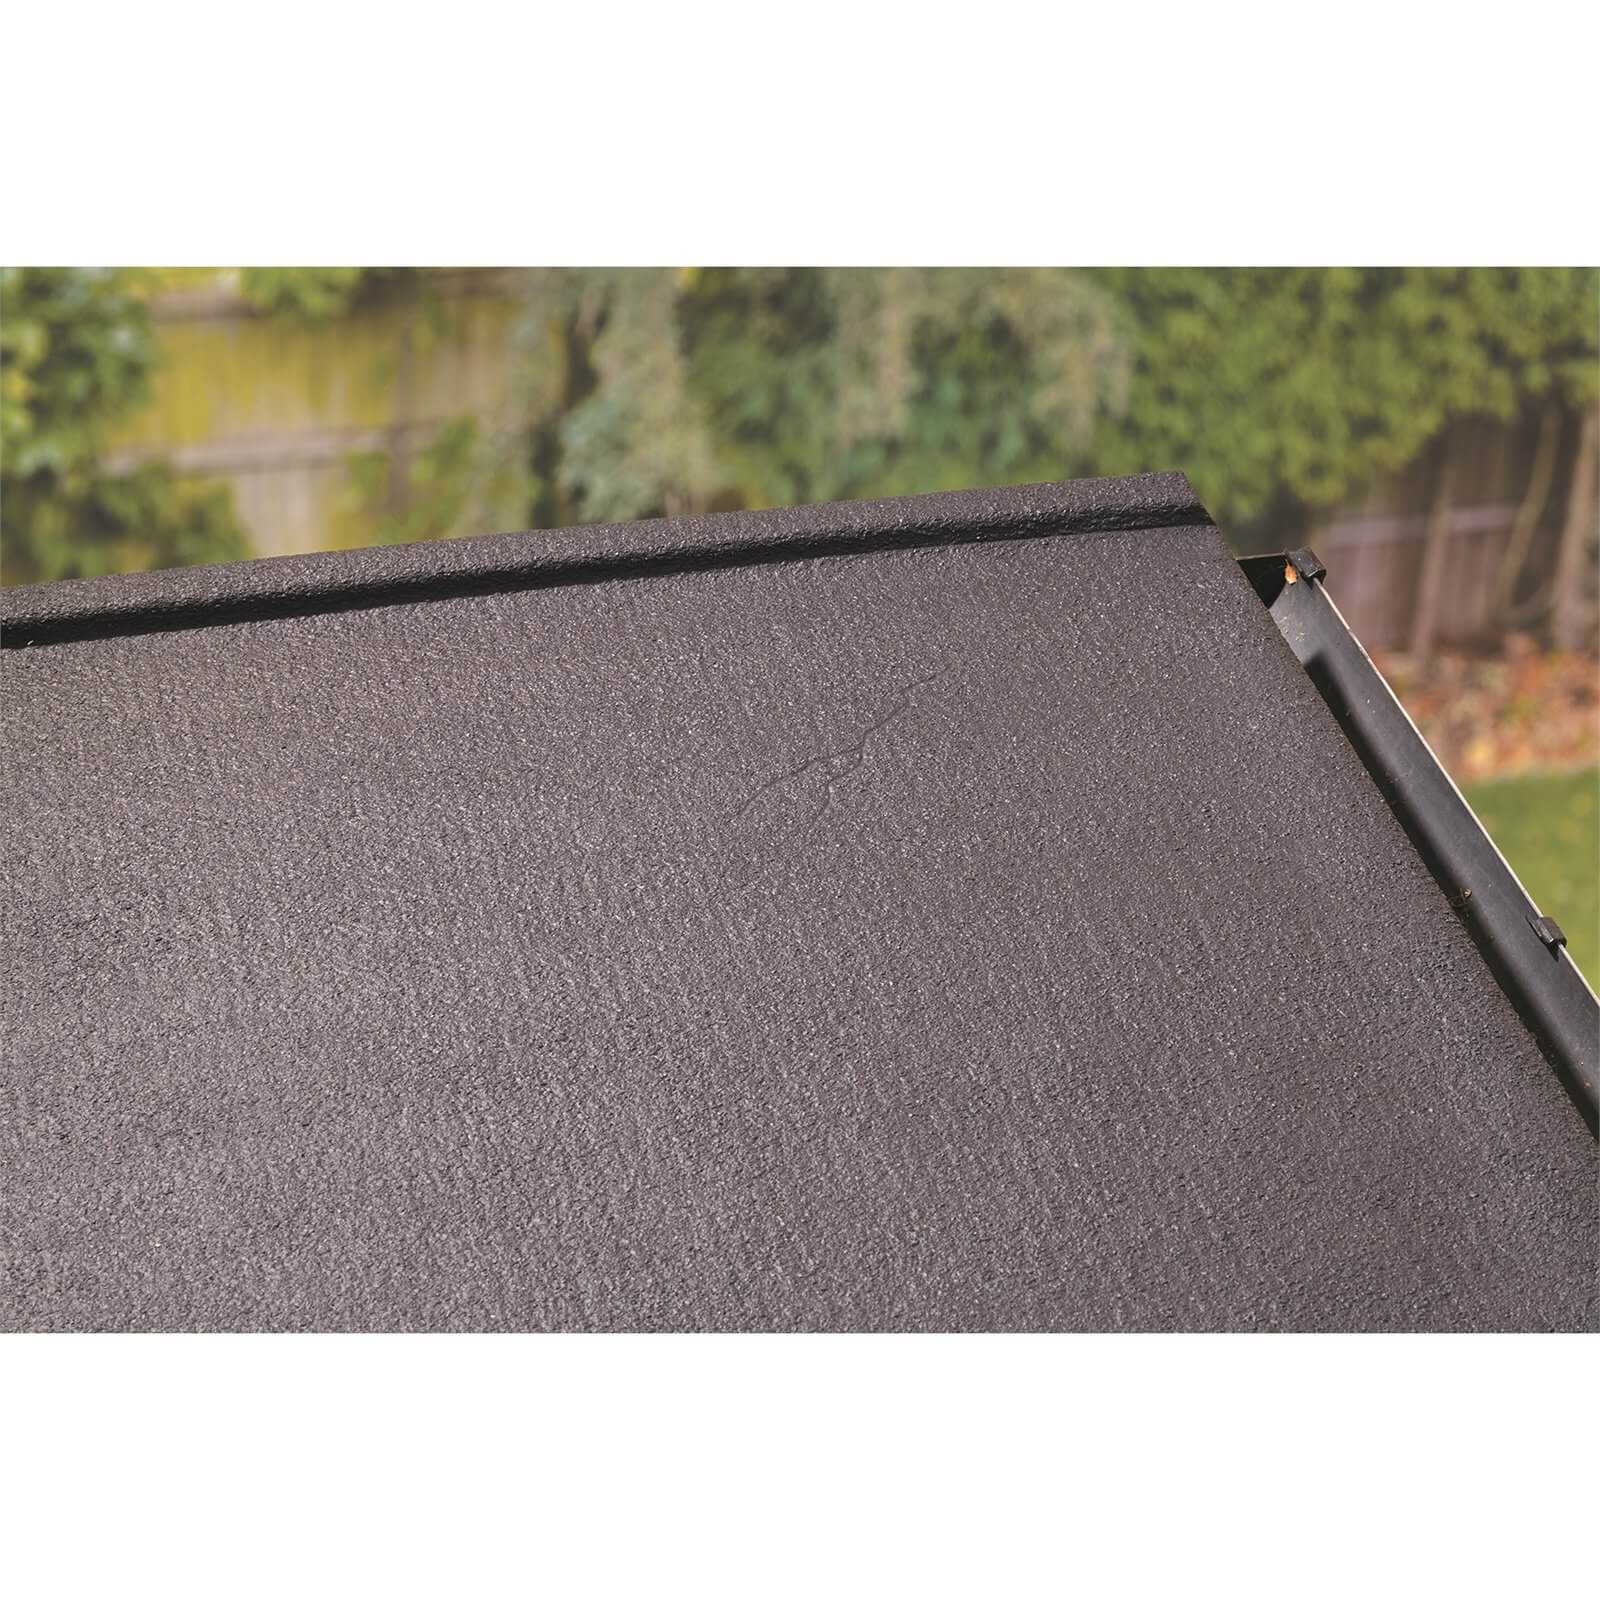 Thompson's 10 Year Roof Seal - Black - 1L